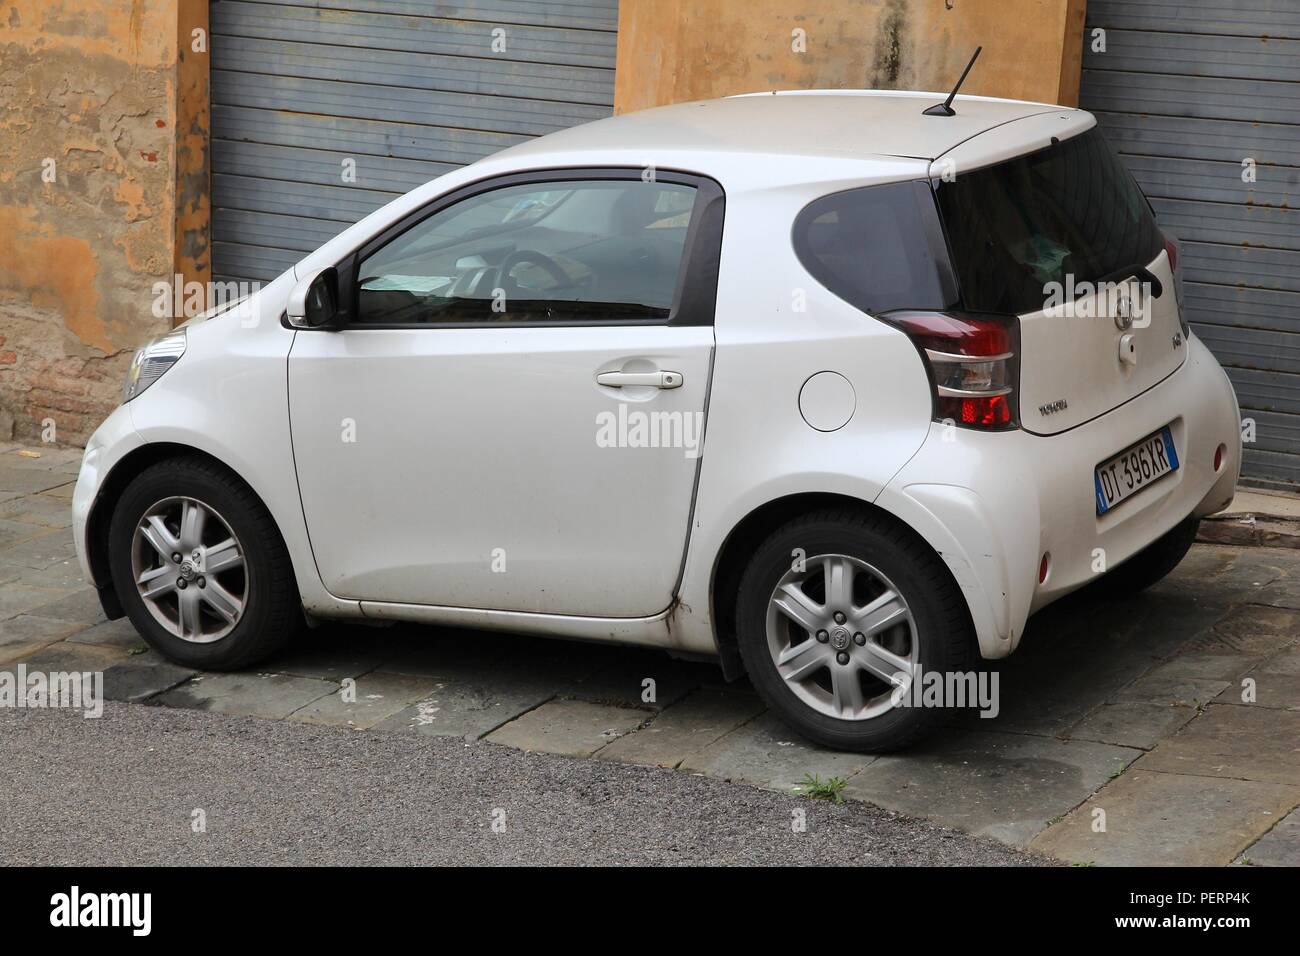 SIENA, ITALY - MAY 3, 2015: Toyota IQ city car parked in Siena, Italy. IQ is in production since 2008. Toyota is the 11th-largest company in the world Stock Photo